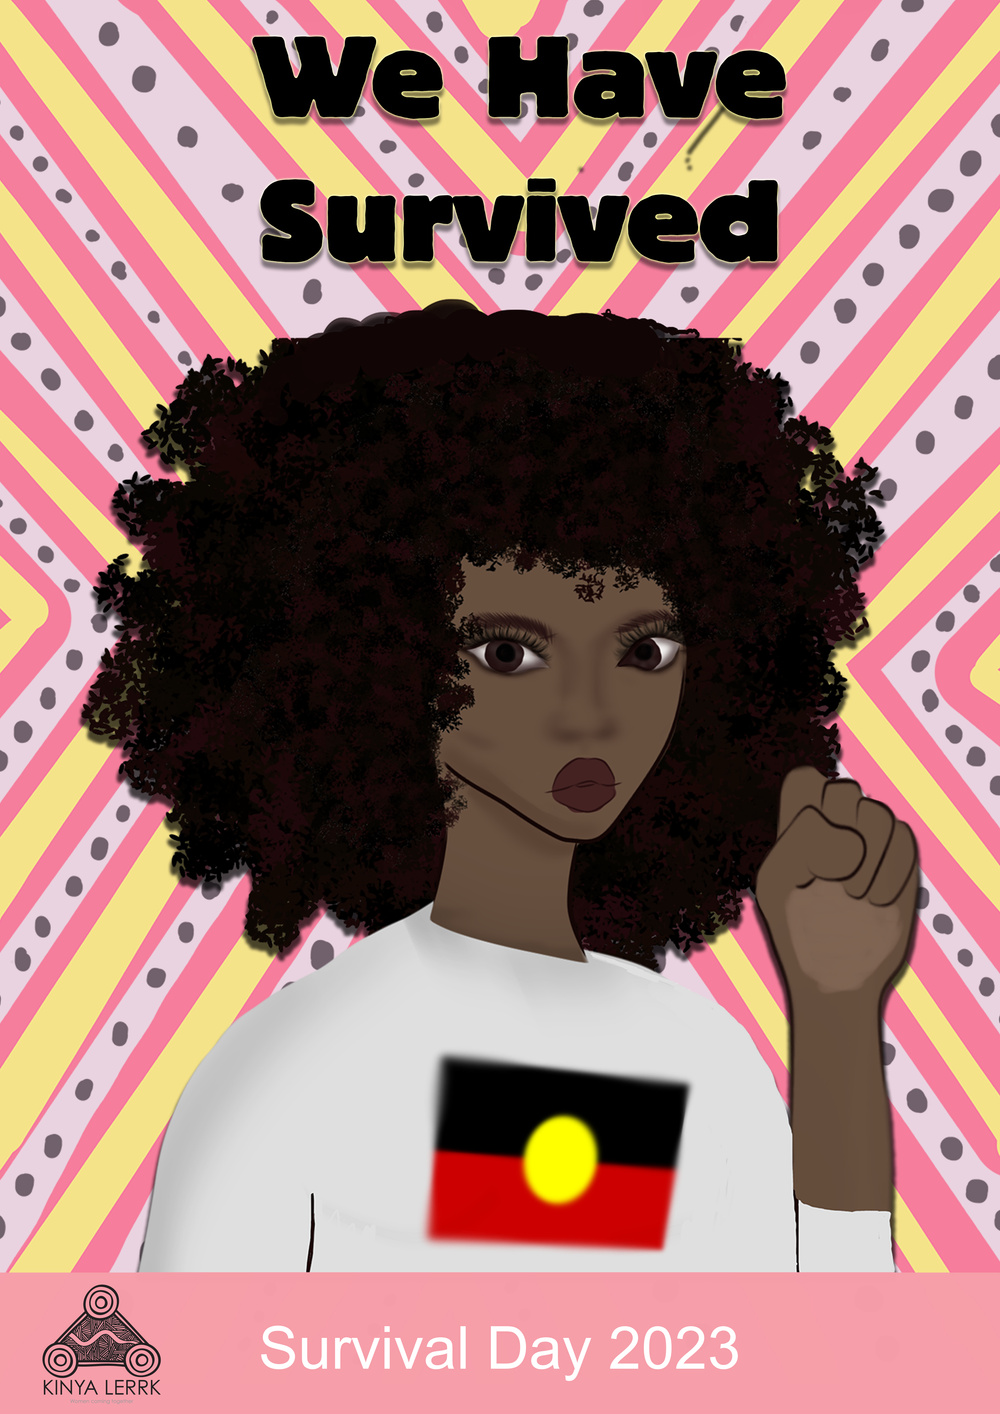 We Have Survived Poster - Survival Day 2023